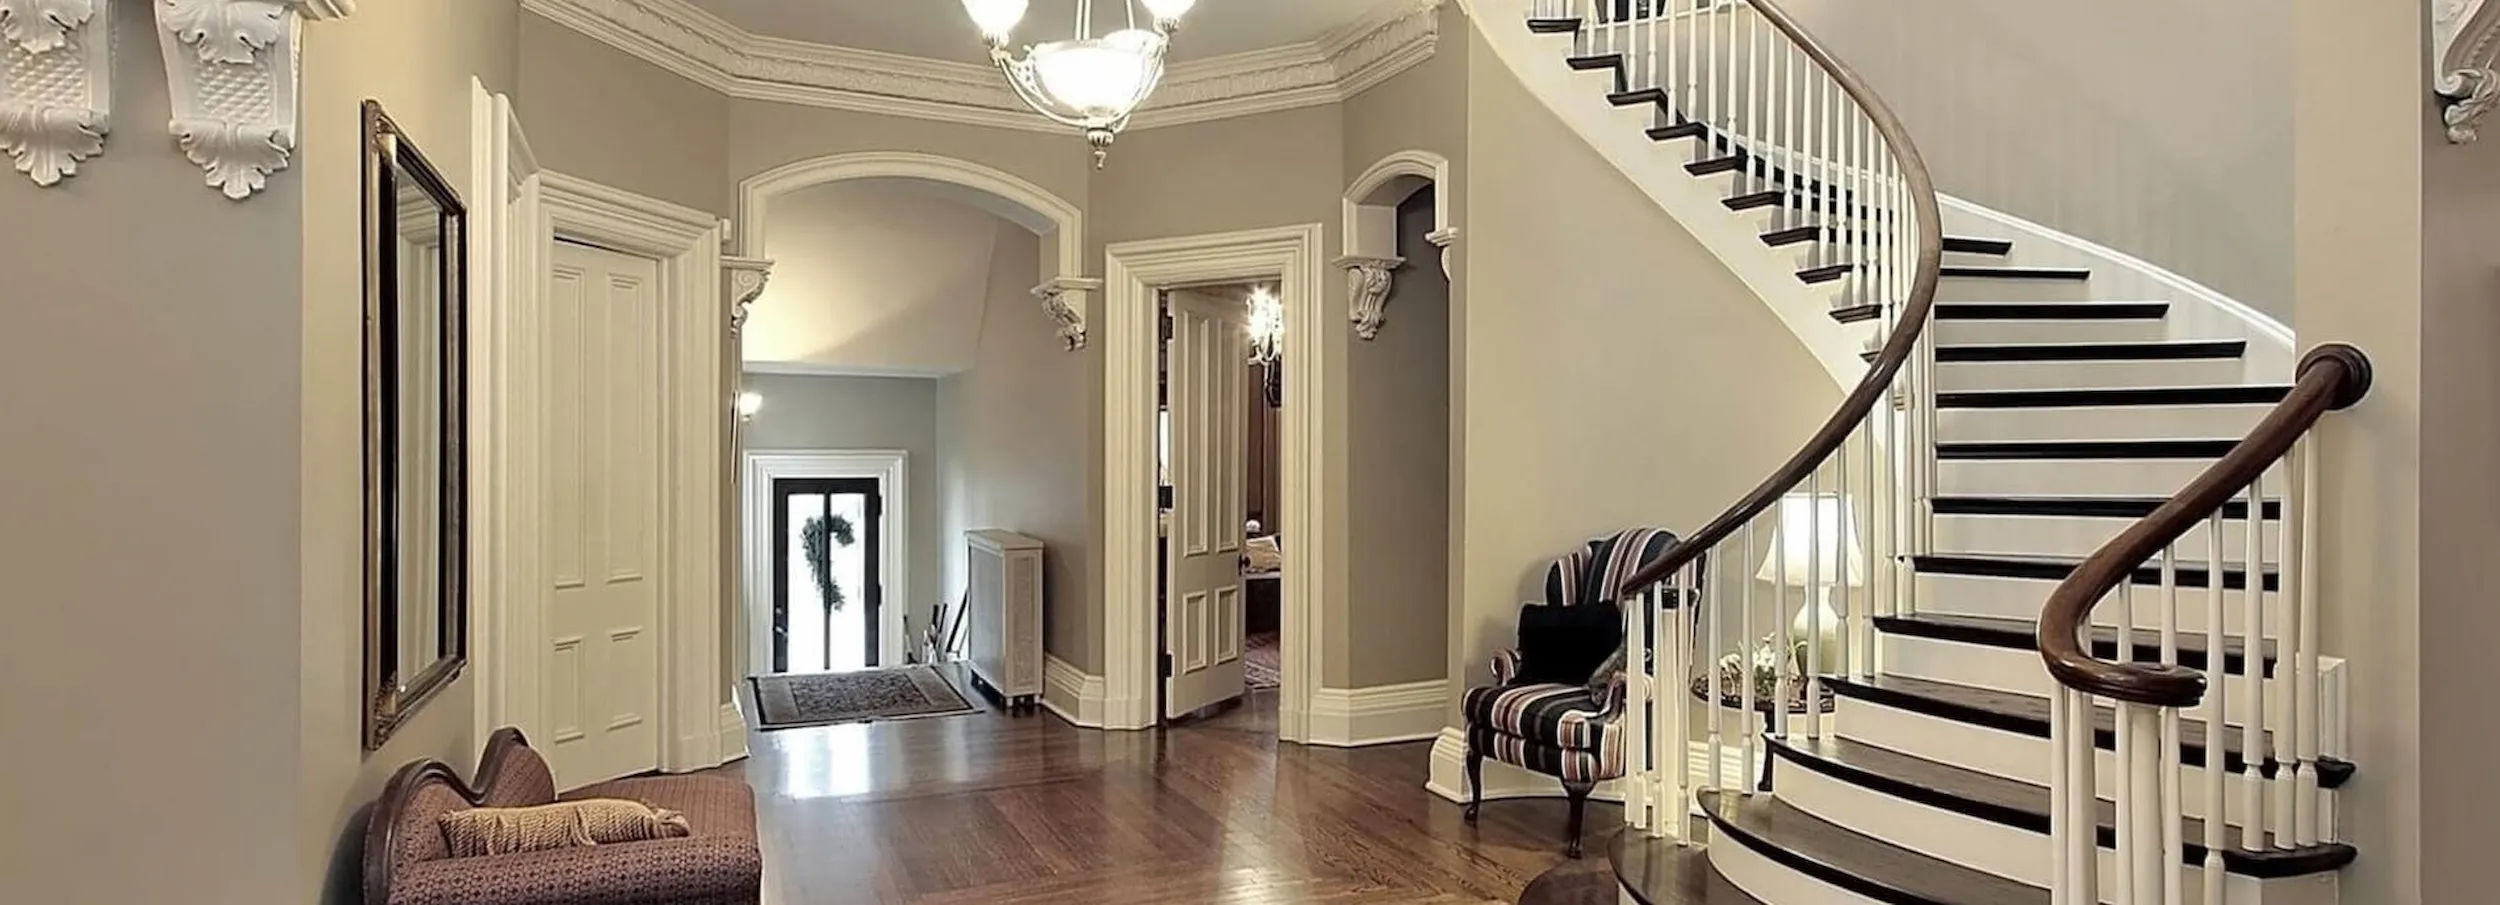 The entryway of a home with a curving staircase to the right and seating throughout the foyer.